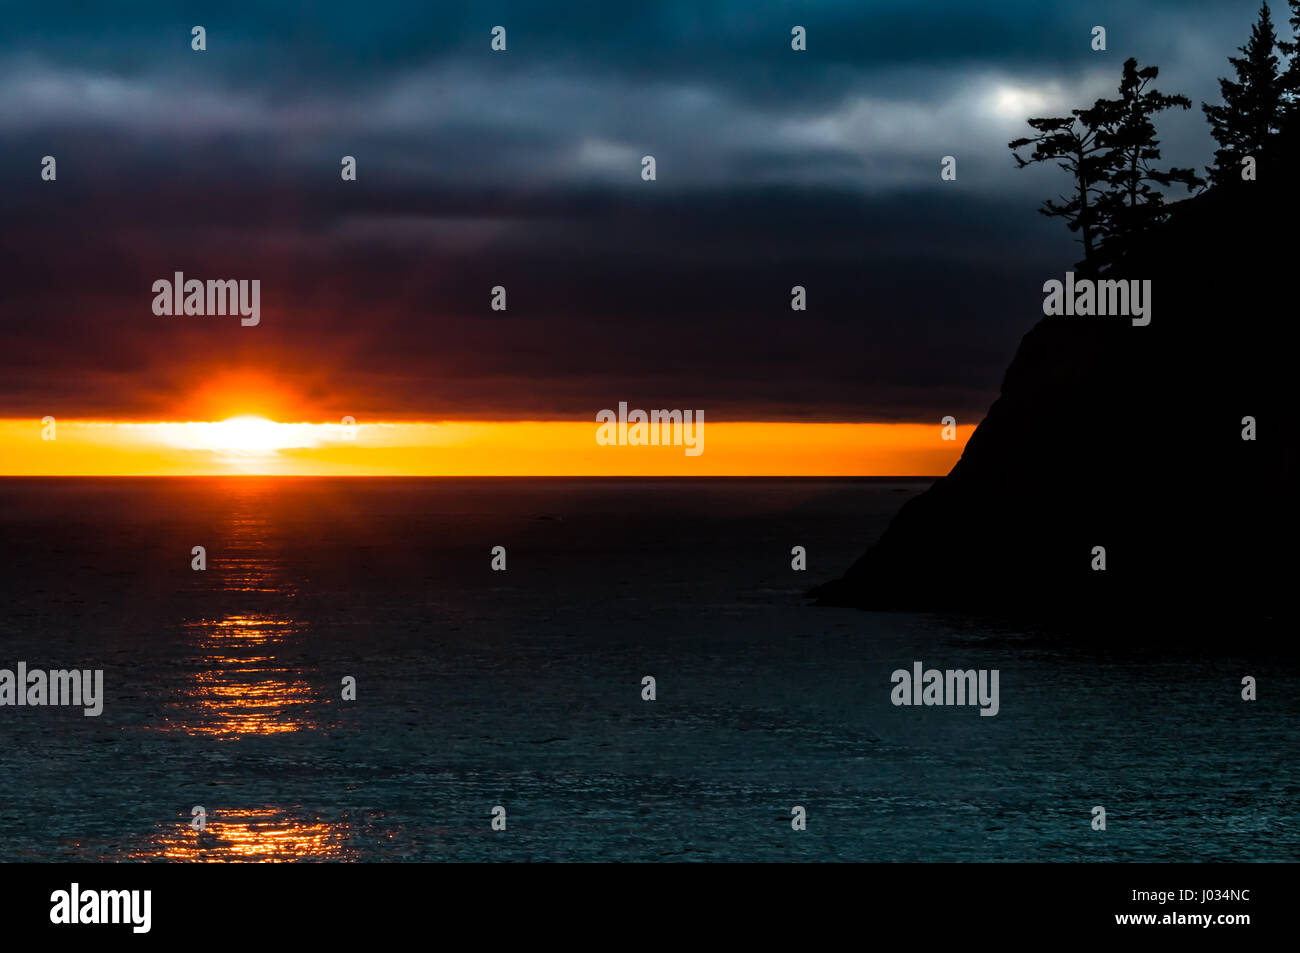 Sunset over the Pacific ocean and rocky coastline with silhouettes of evergreen trees in Nothern California Stock Photo